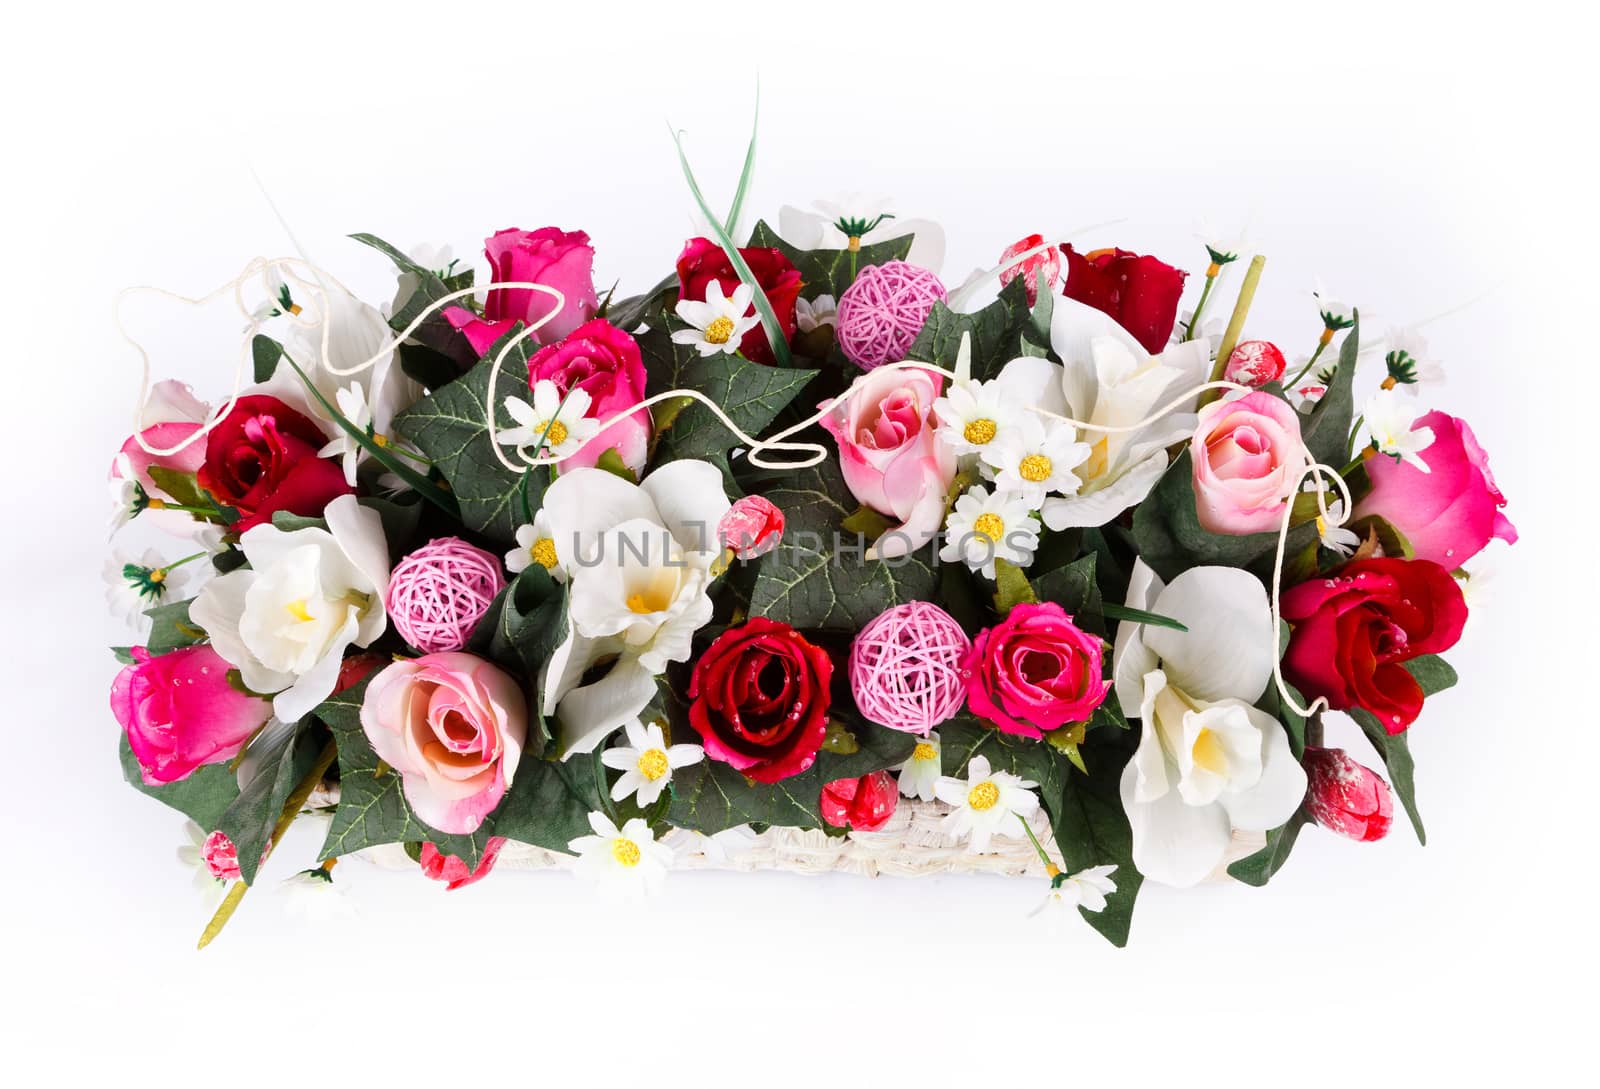 flowers in a basket isolated on white